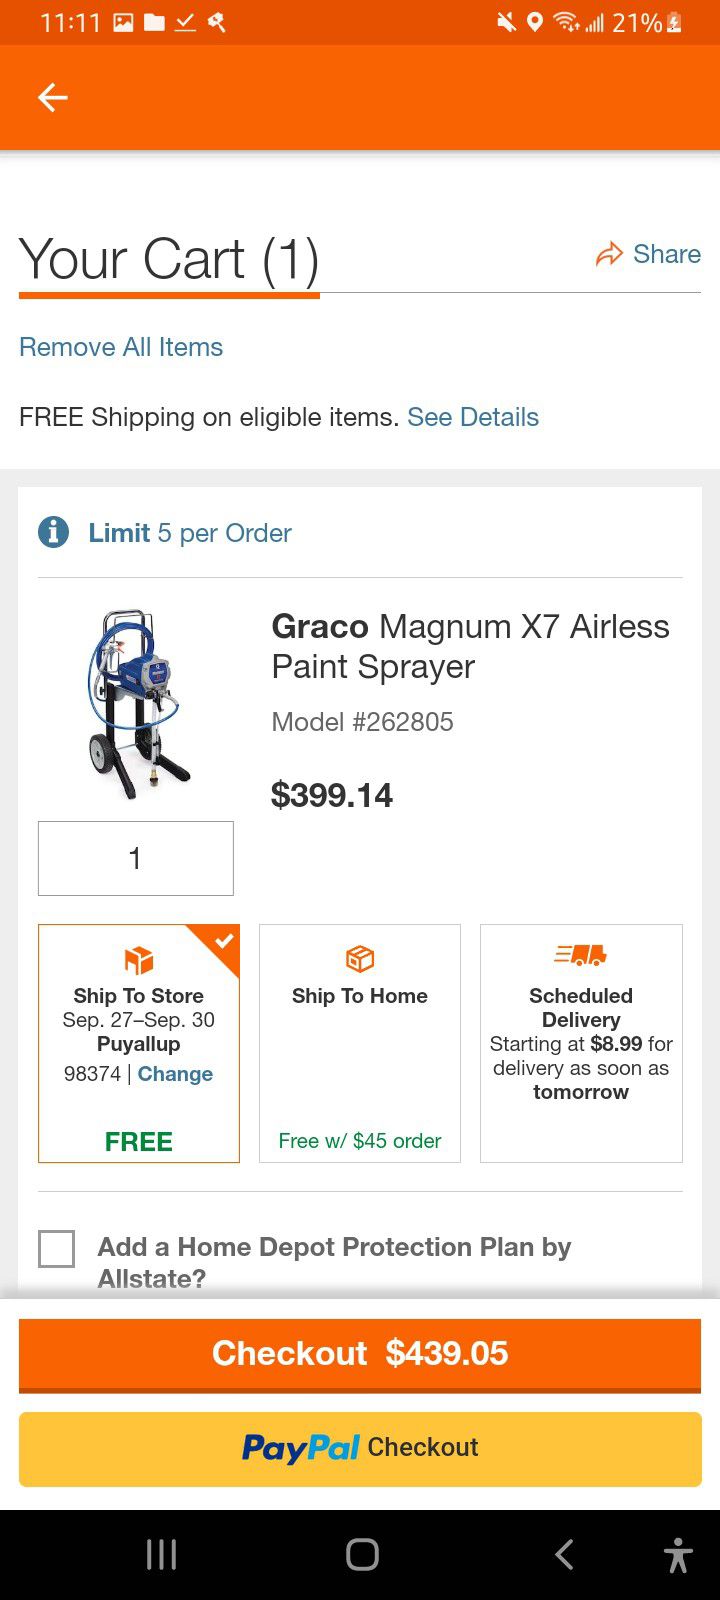 Graco Magnum X7 Airless Paint Spayer "Brand New"